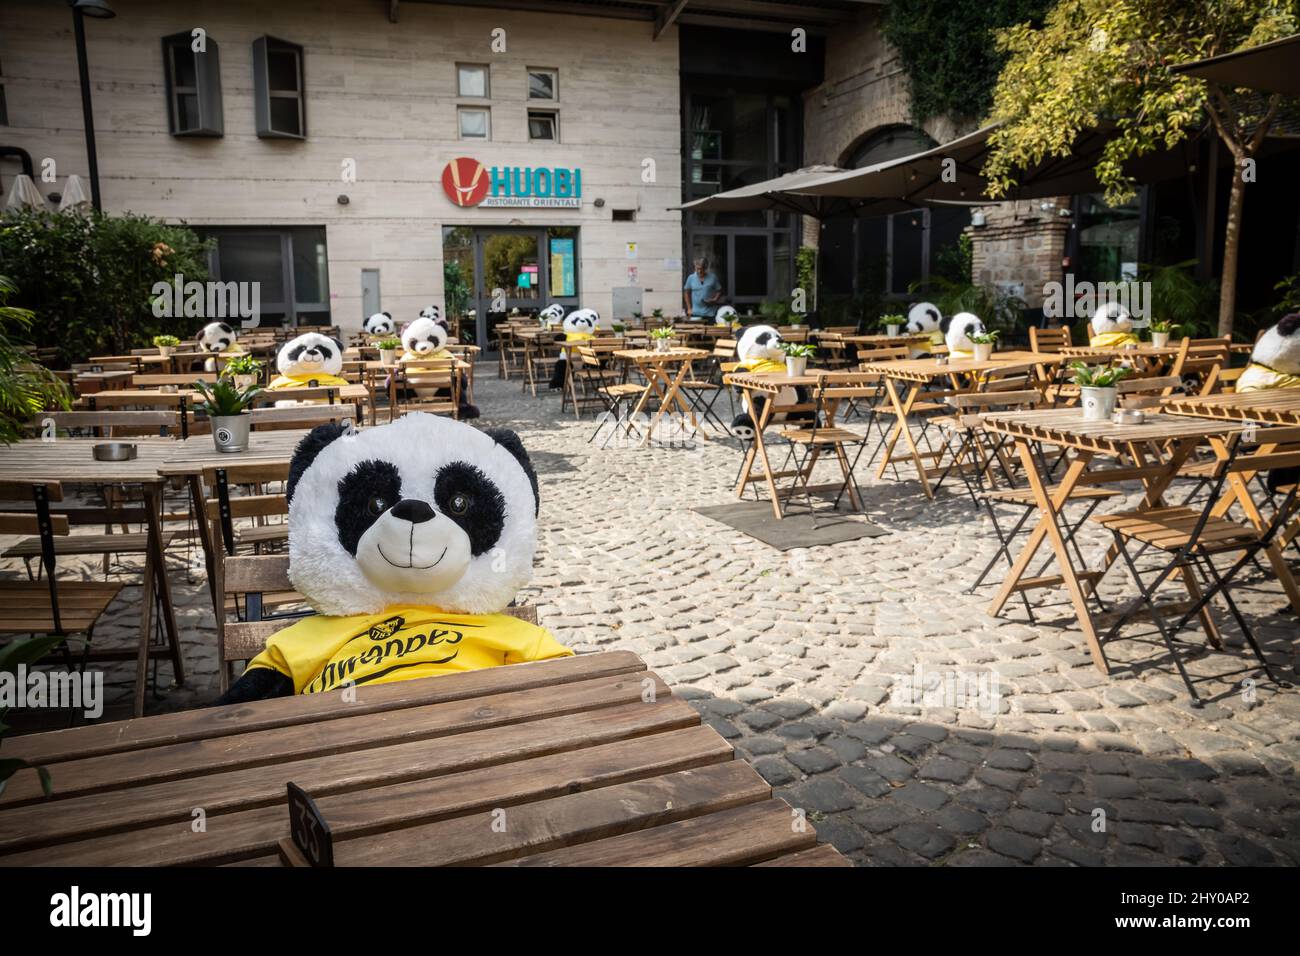 Plush pandas in a summer restaurant on the outskirts of Rome Stock Photo